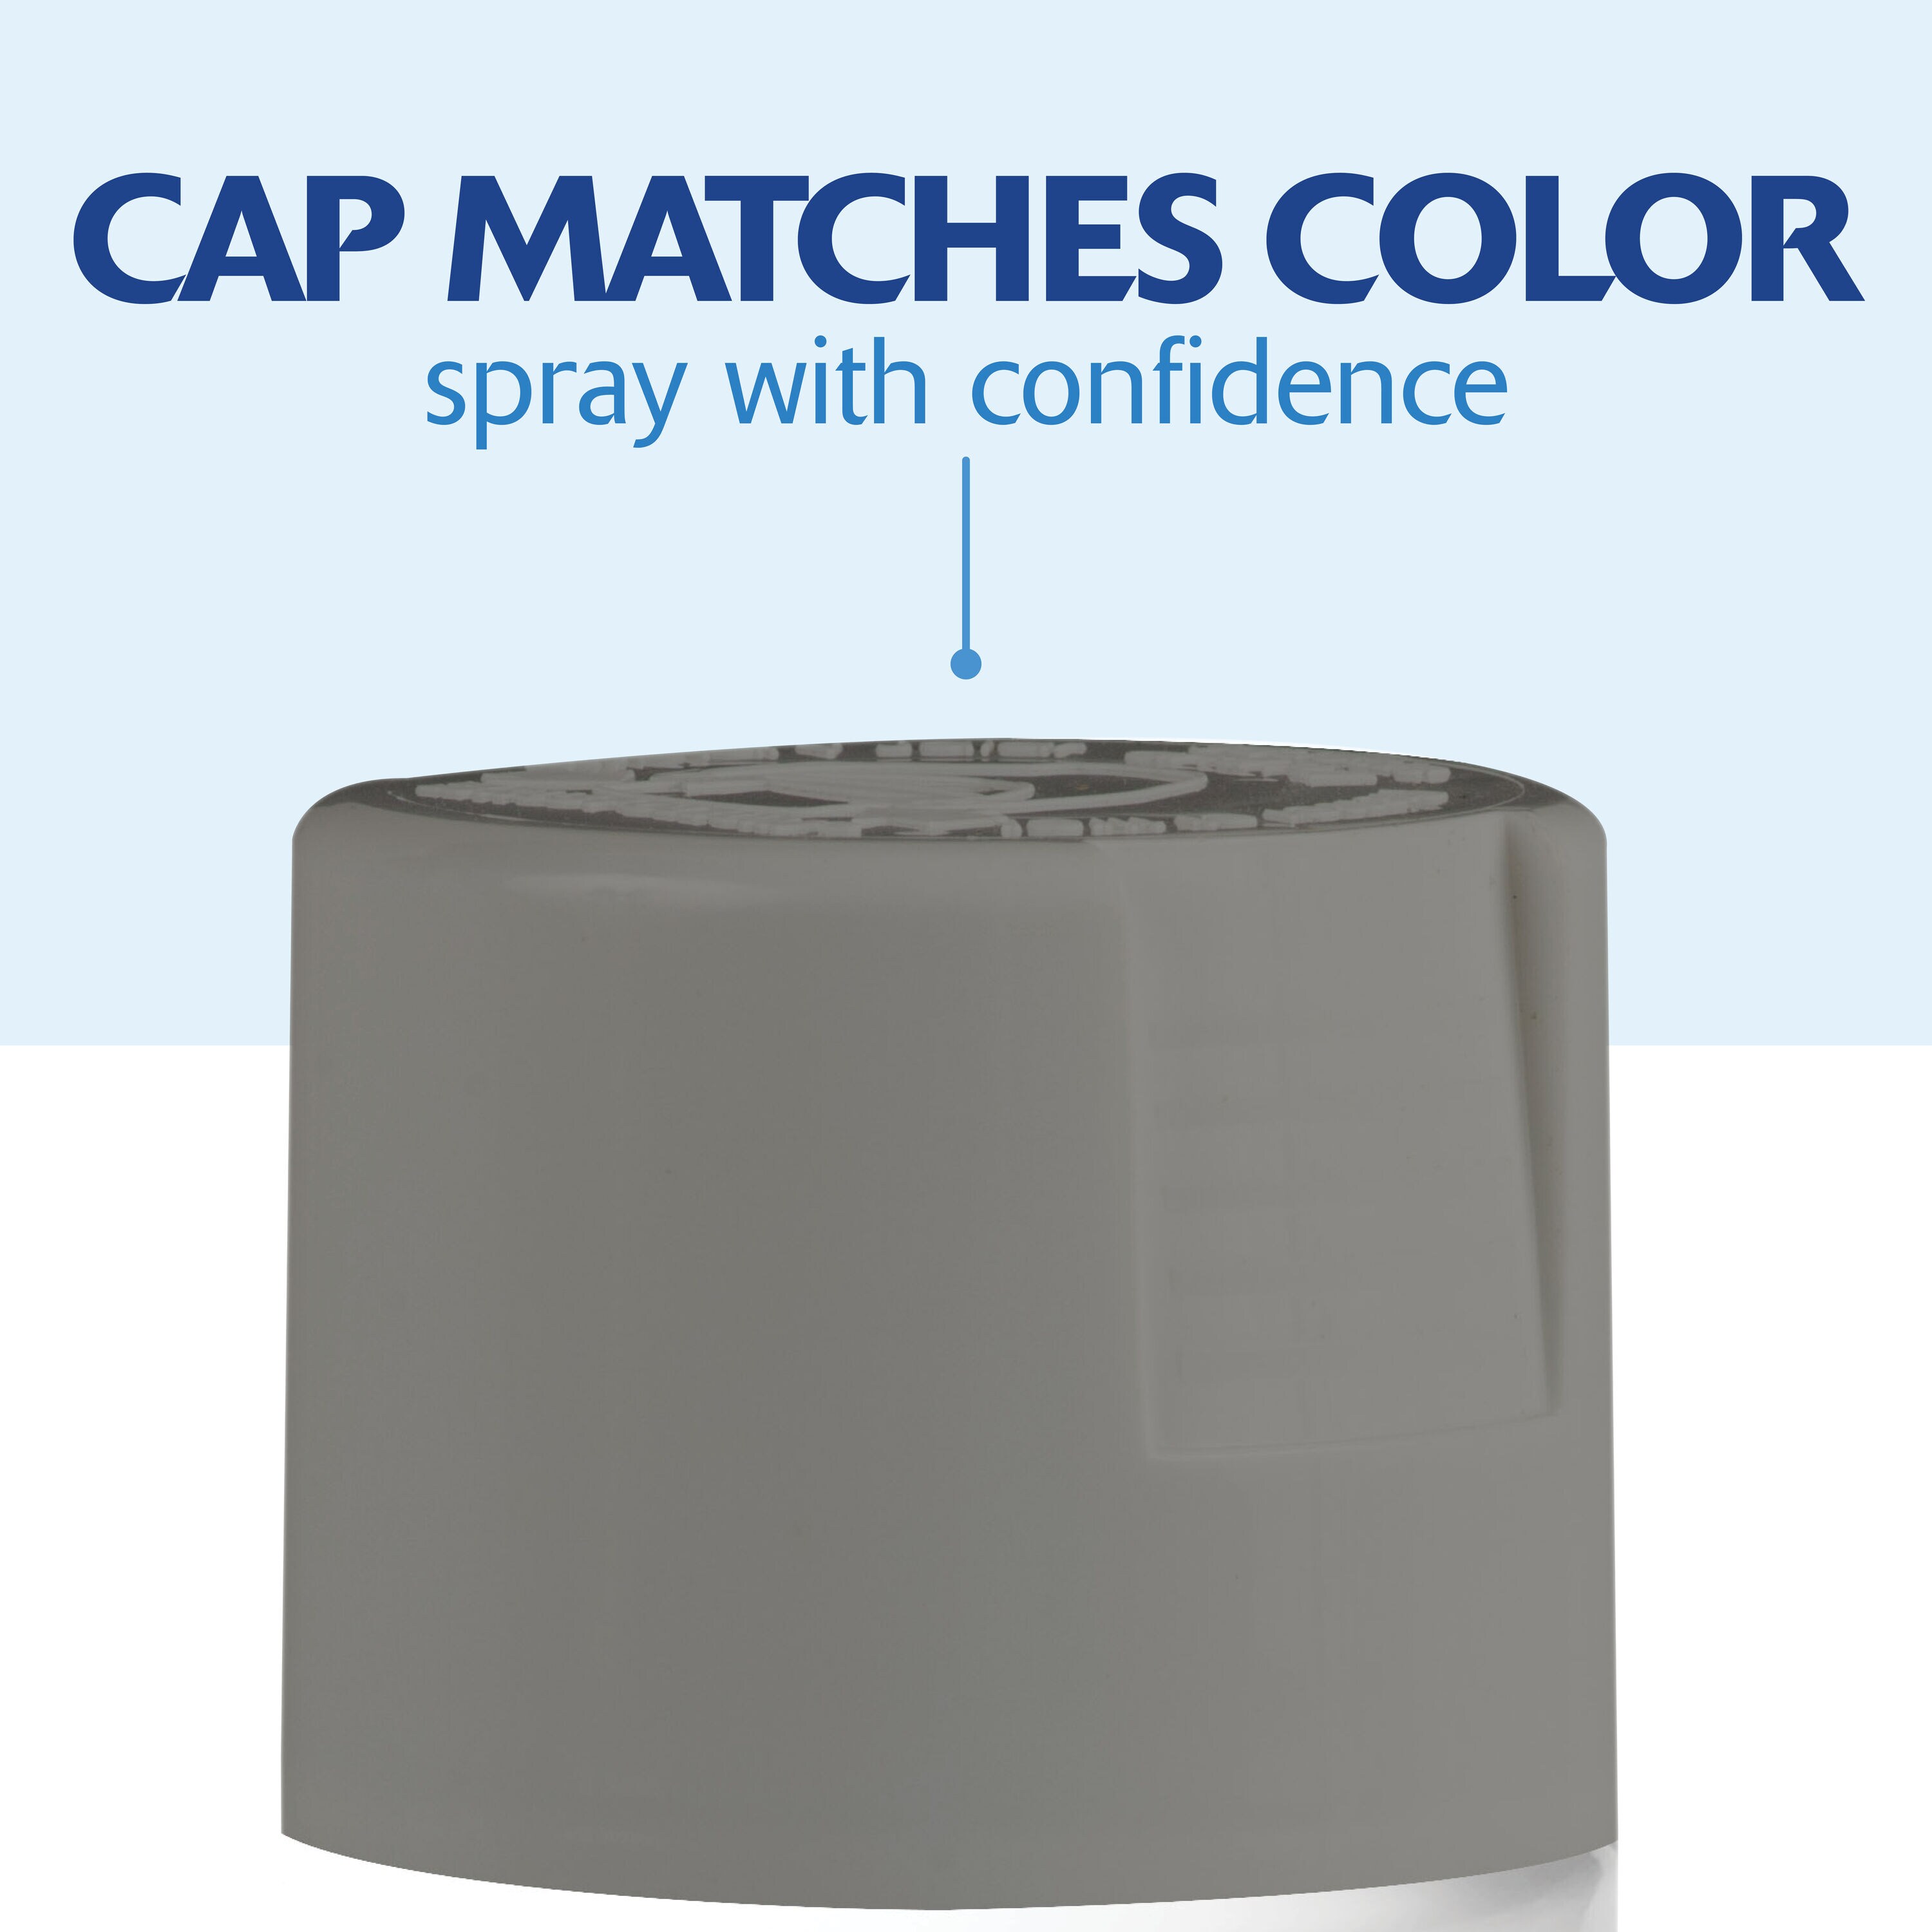 Sears Soft Gray Precisely Matched For Paint and Spray Paint